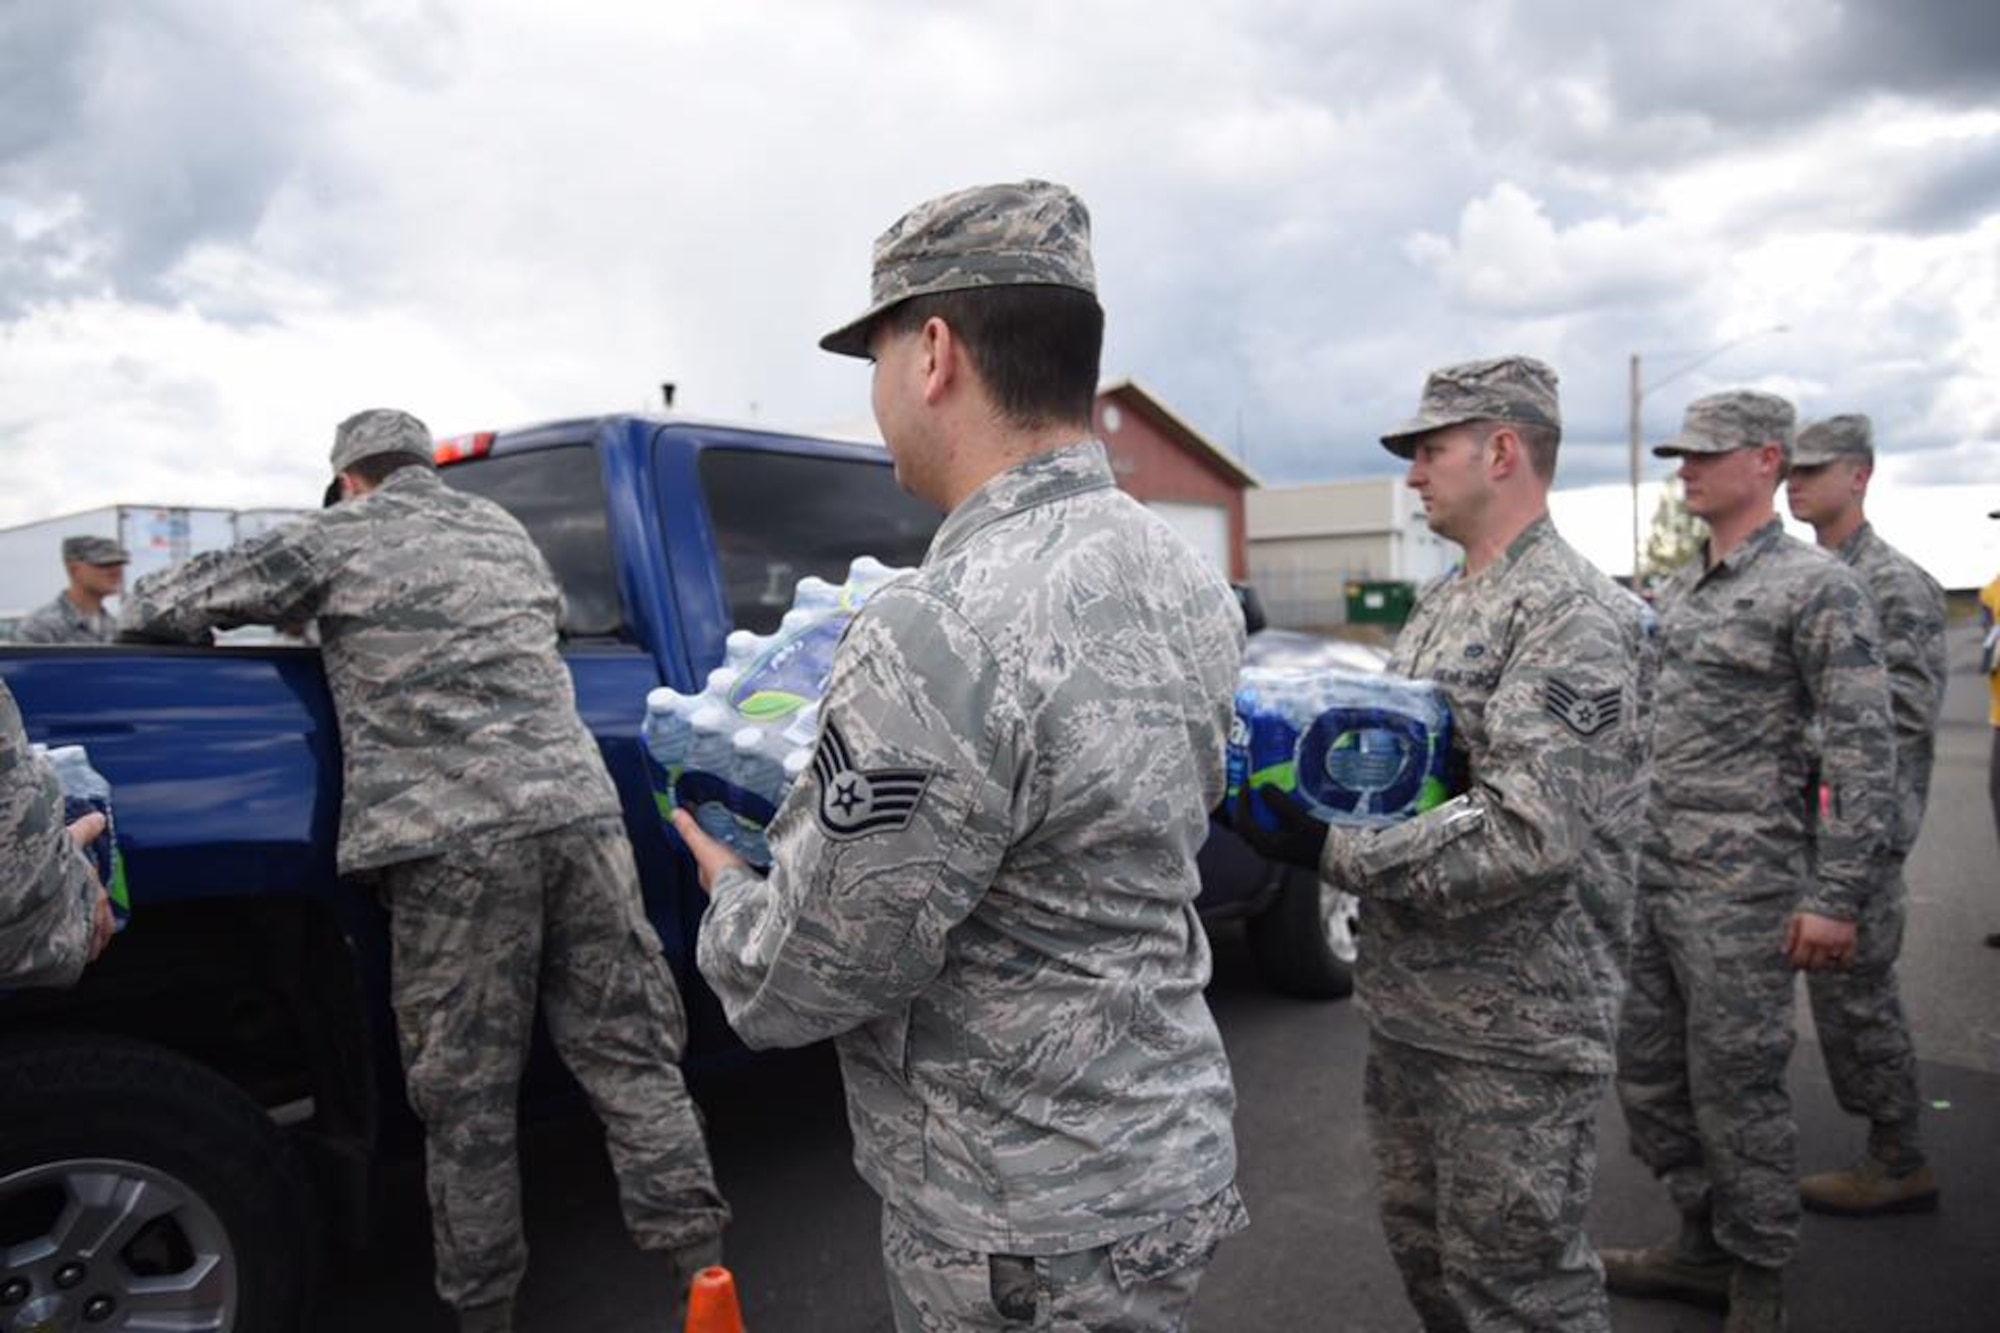 More than a dozen Airmen from Fairchild Air Force Base  joined City of Airway Heights officials and volunteers to hand out 24,000 gallons of bottled water in Airway Heights, Washington, May 18, 2017. The water is being distributed to city residents impacted by the city’s advisory not to consume tap water after preliminary results of sampling conducted by Fairchild AFB indicated wells that supply the Airway Heights water system contained Perfluorooctanesulfonic (PFOS) and Perfluorooctanoic acids (PFOA) concentrations above the EPA’s lifetime Health Advisory levels. (U.S. Air Force photo by 2nd Lt. Kate Miranda/released)
